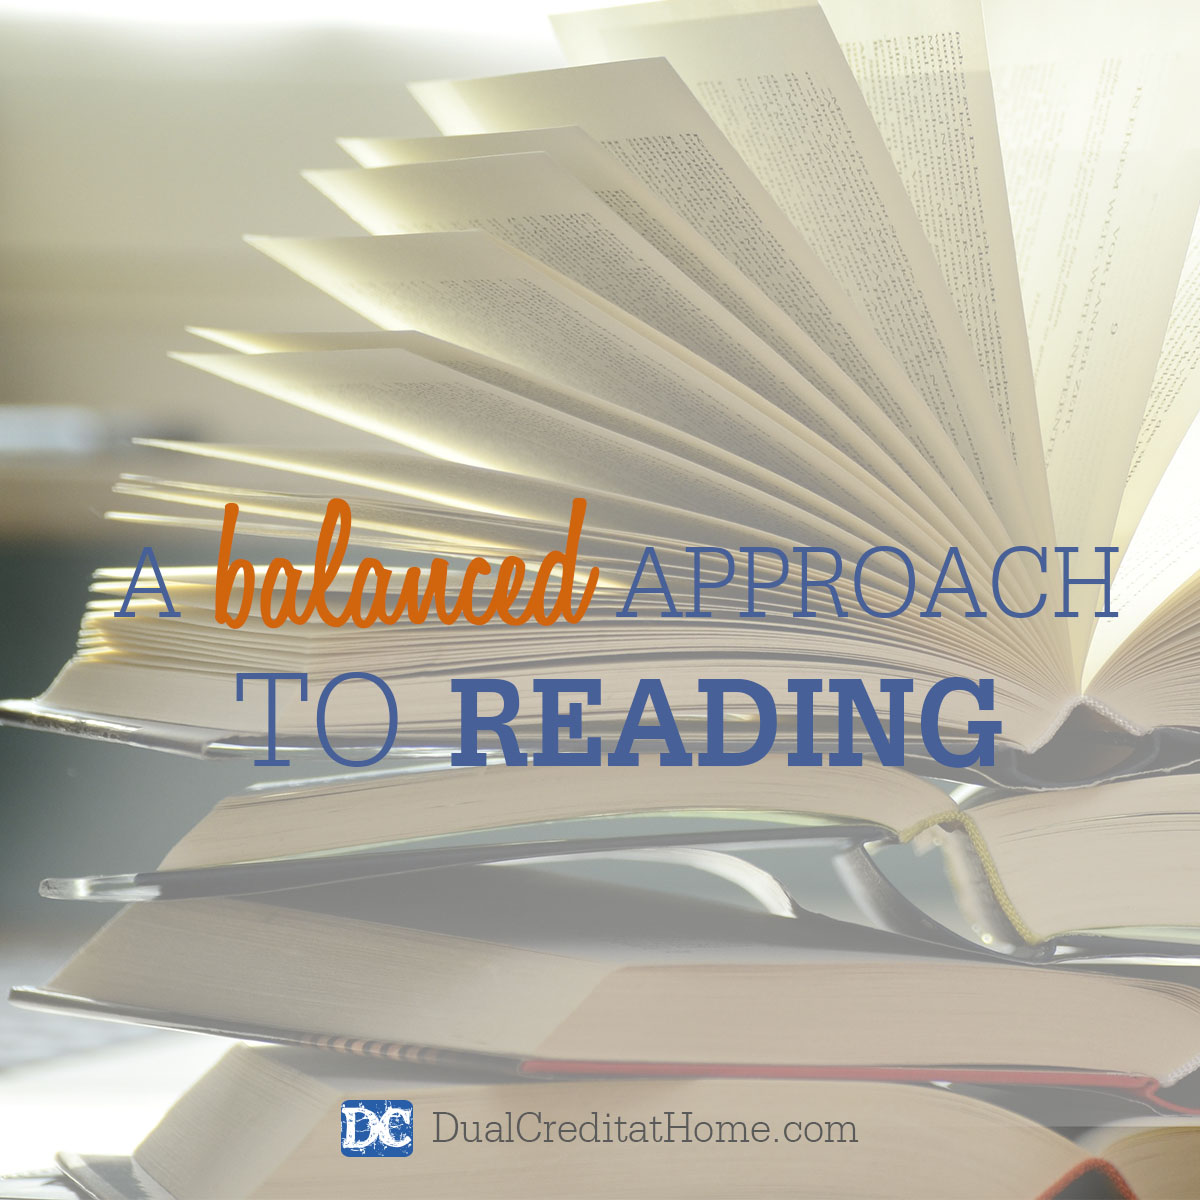 A Balanced Approach to Reading